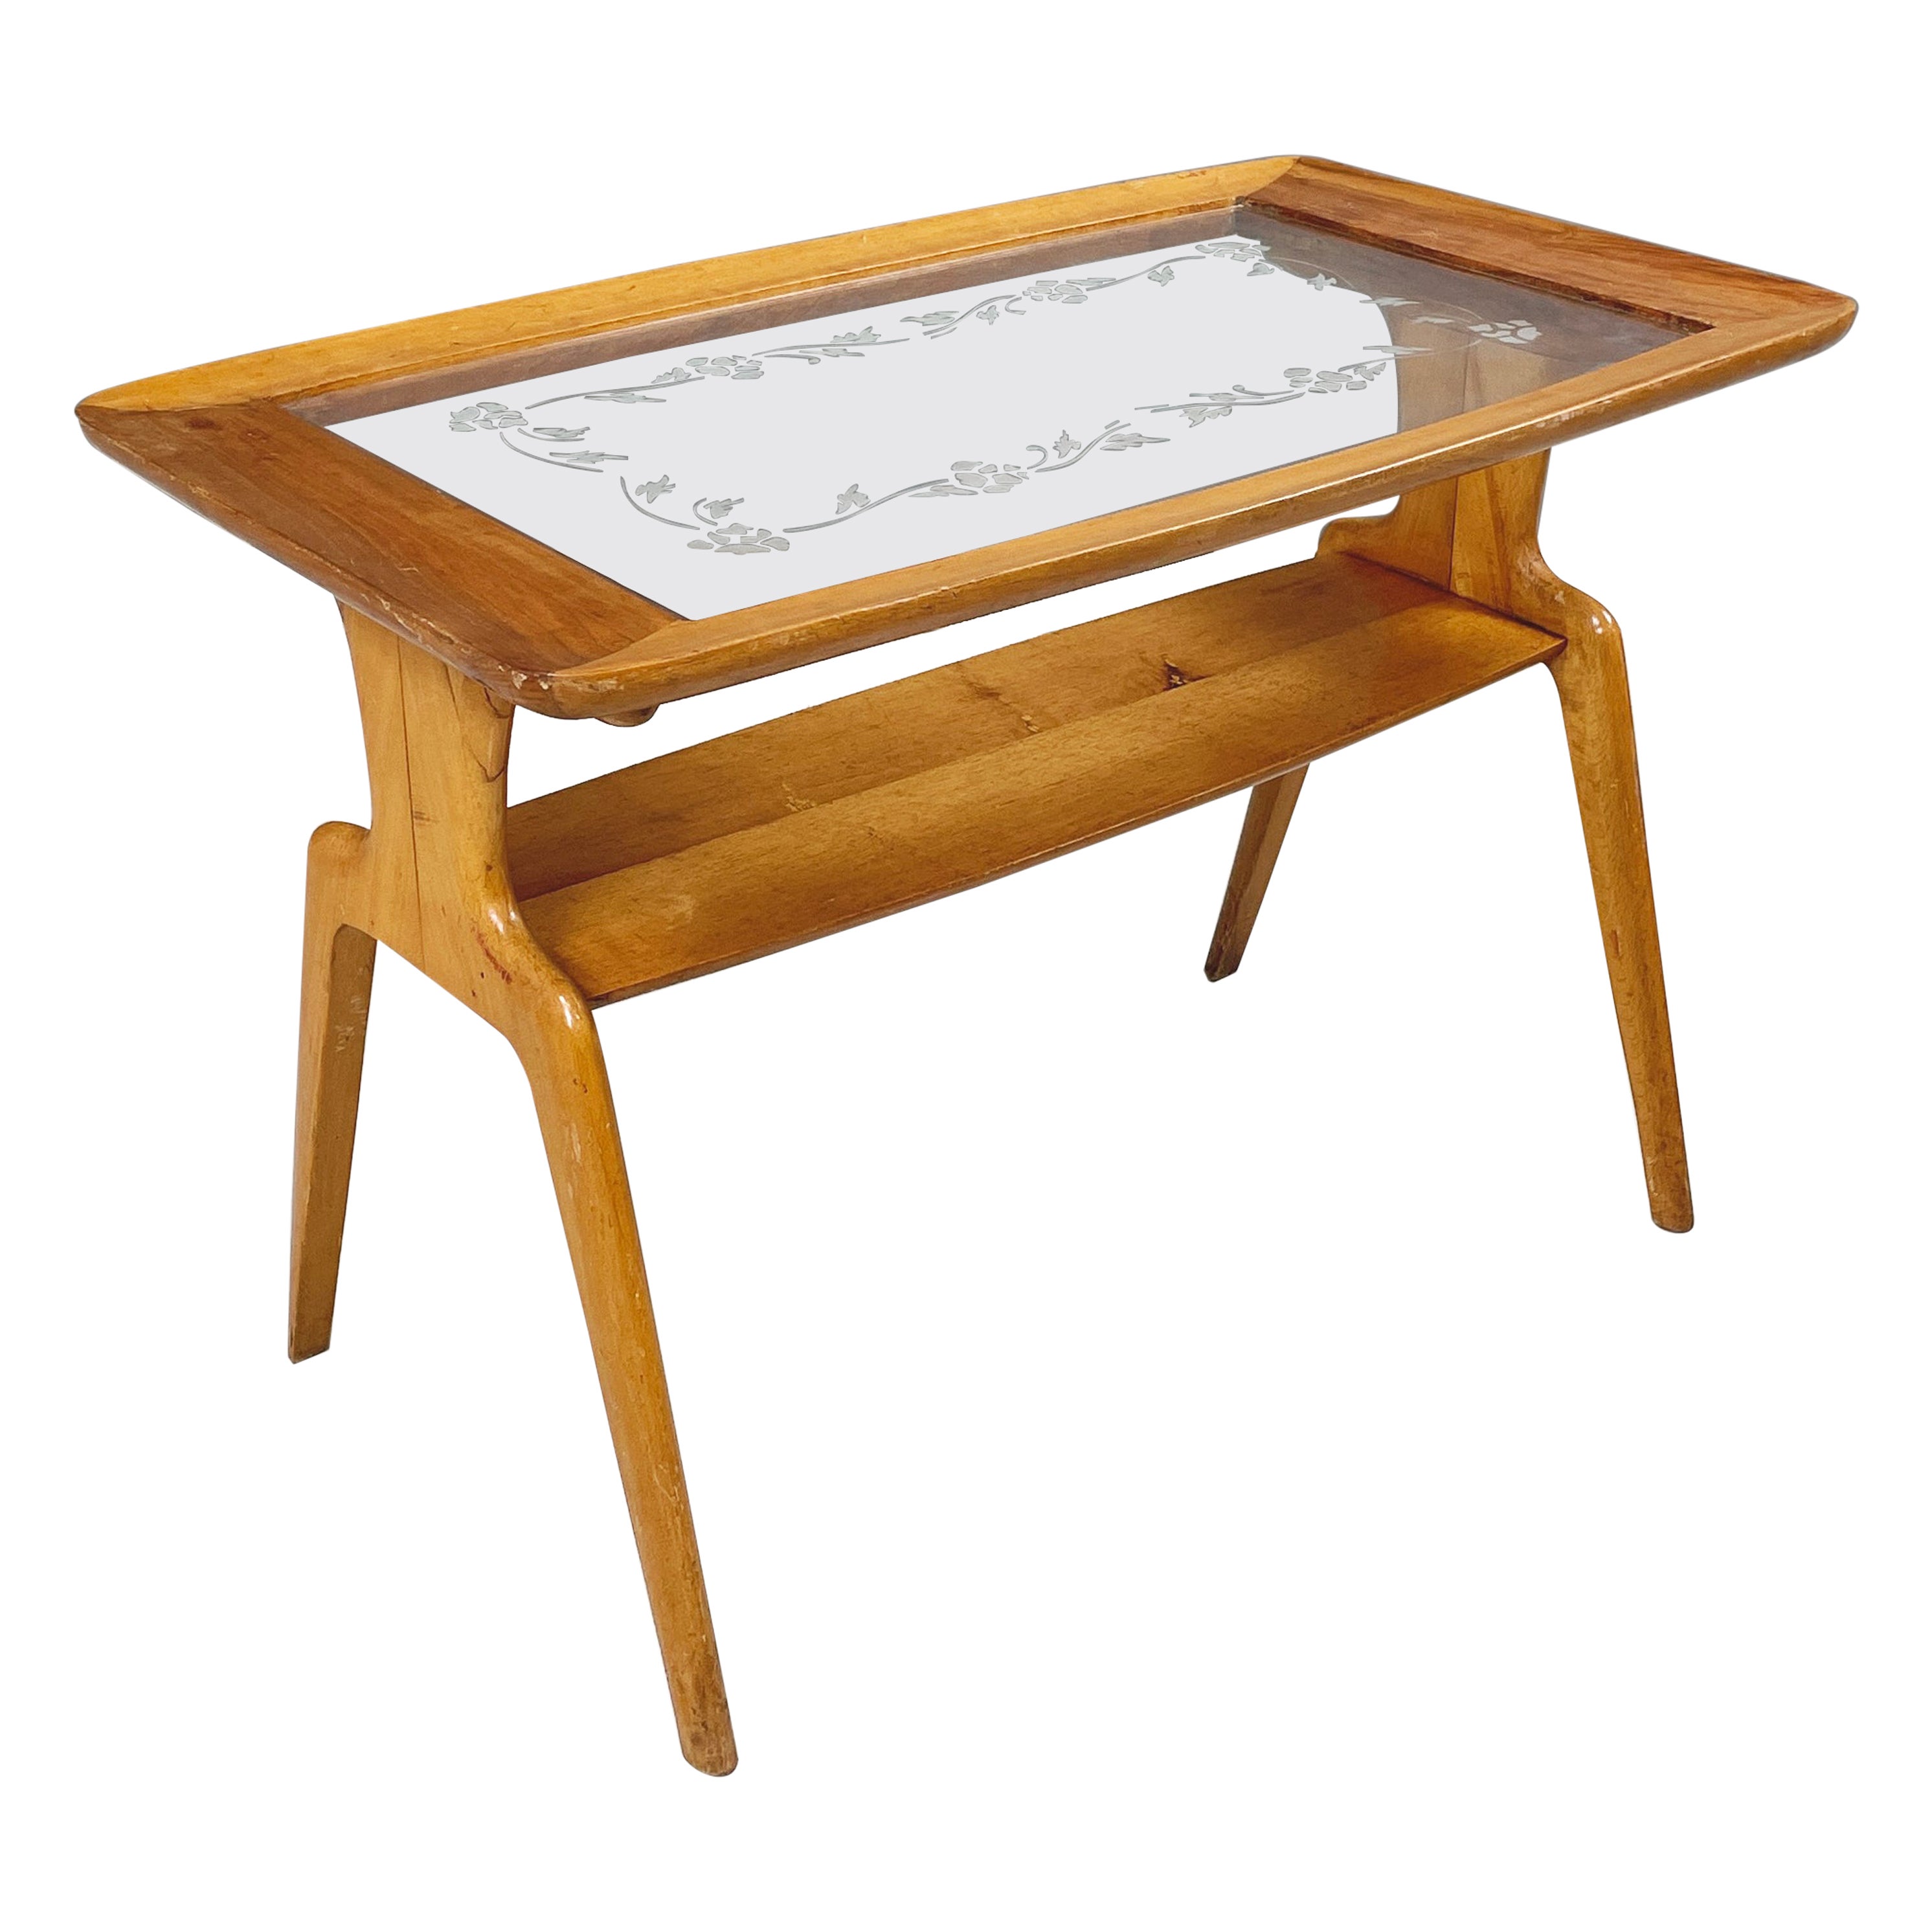 Italian mid-century modern Coffee table in wood and decorated glass, 1950s For Sale